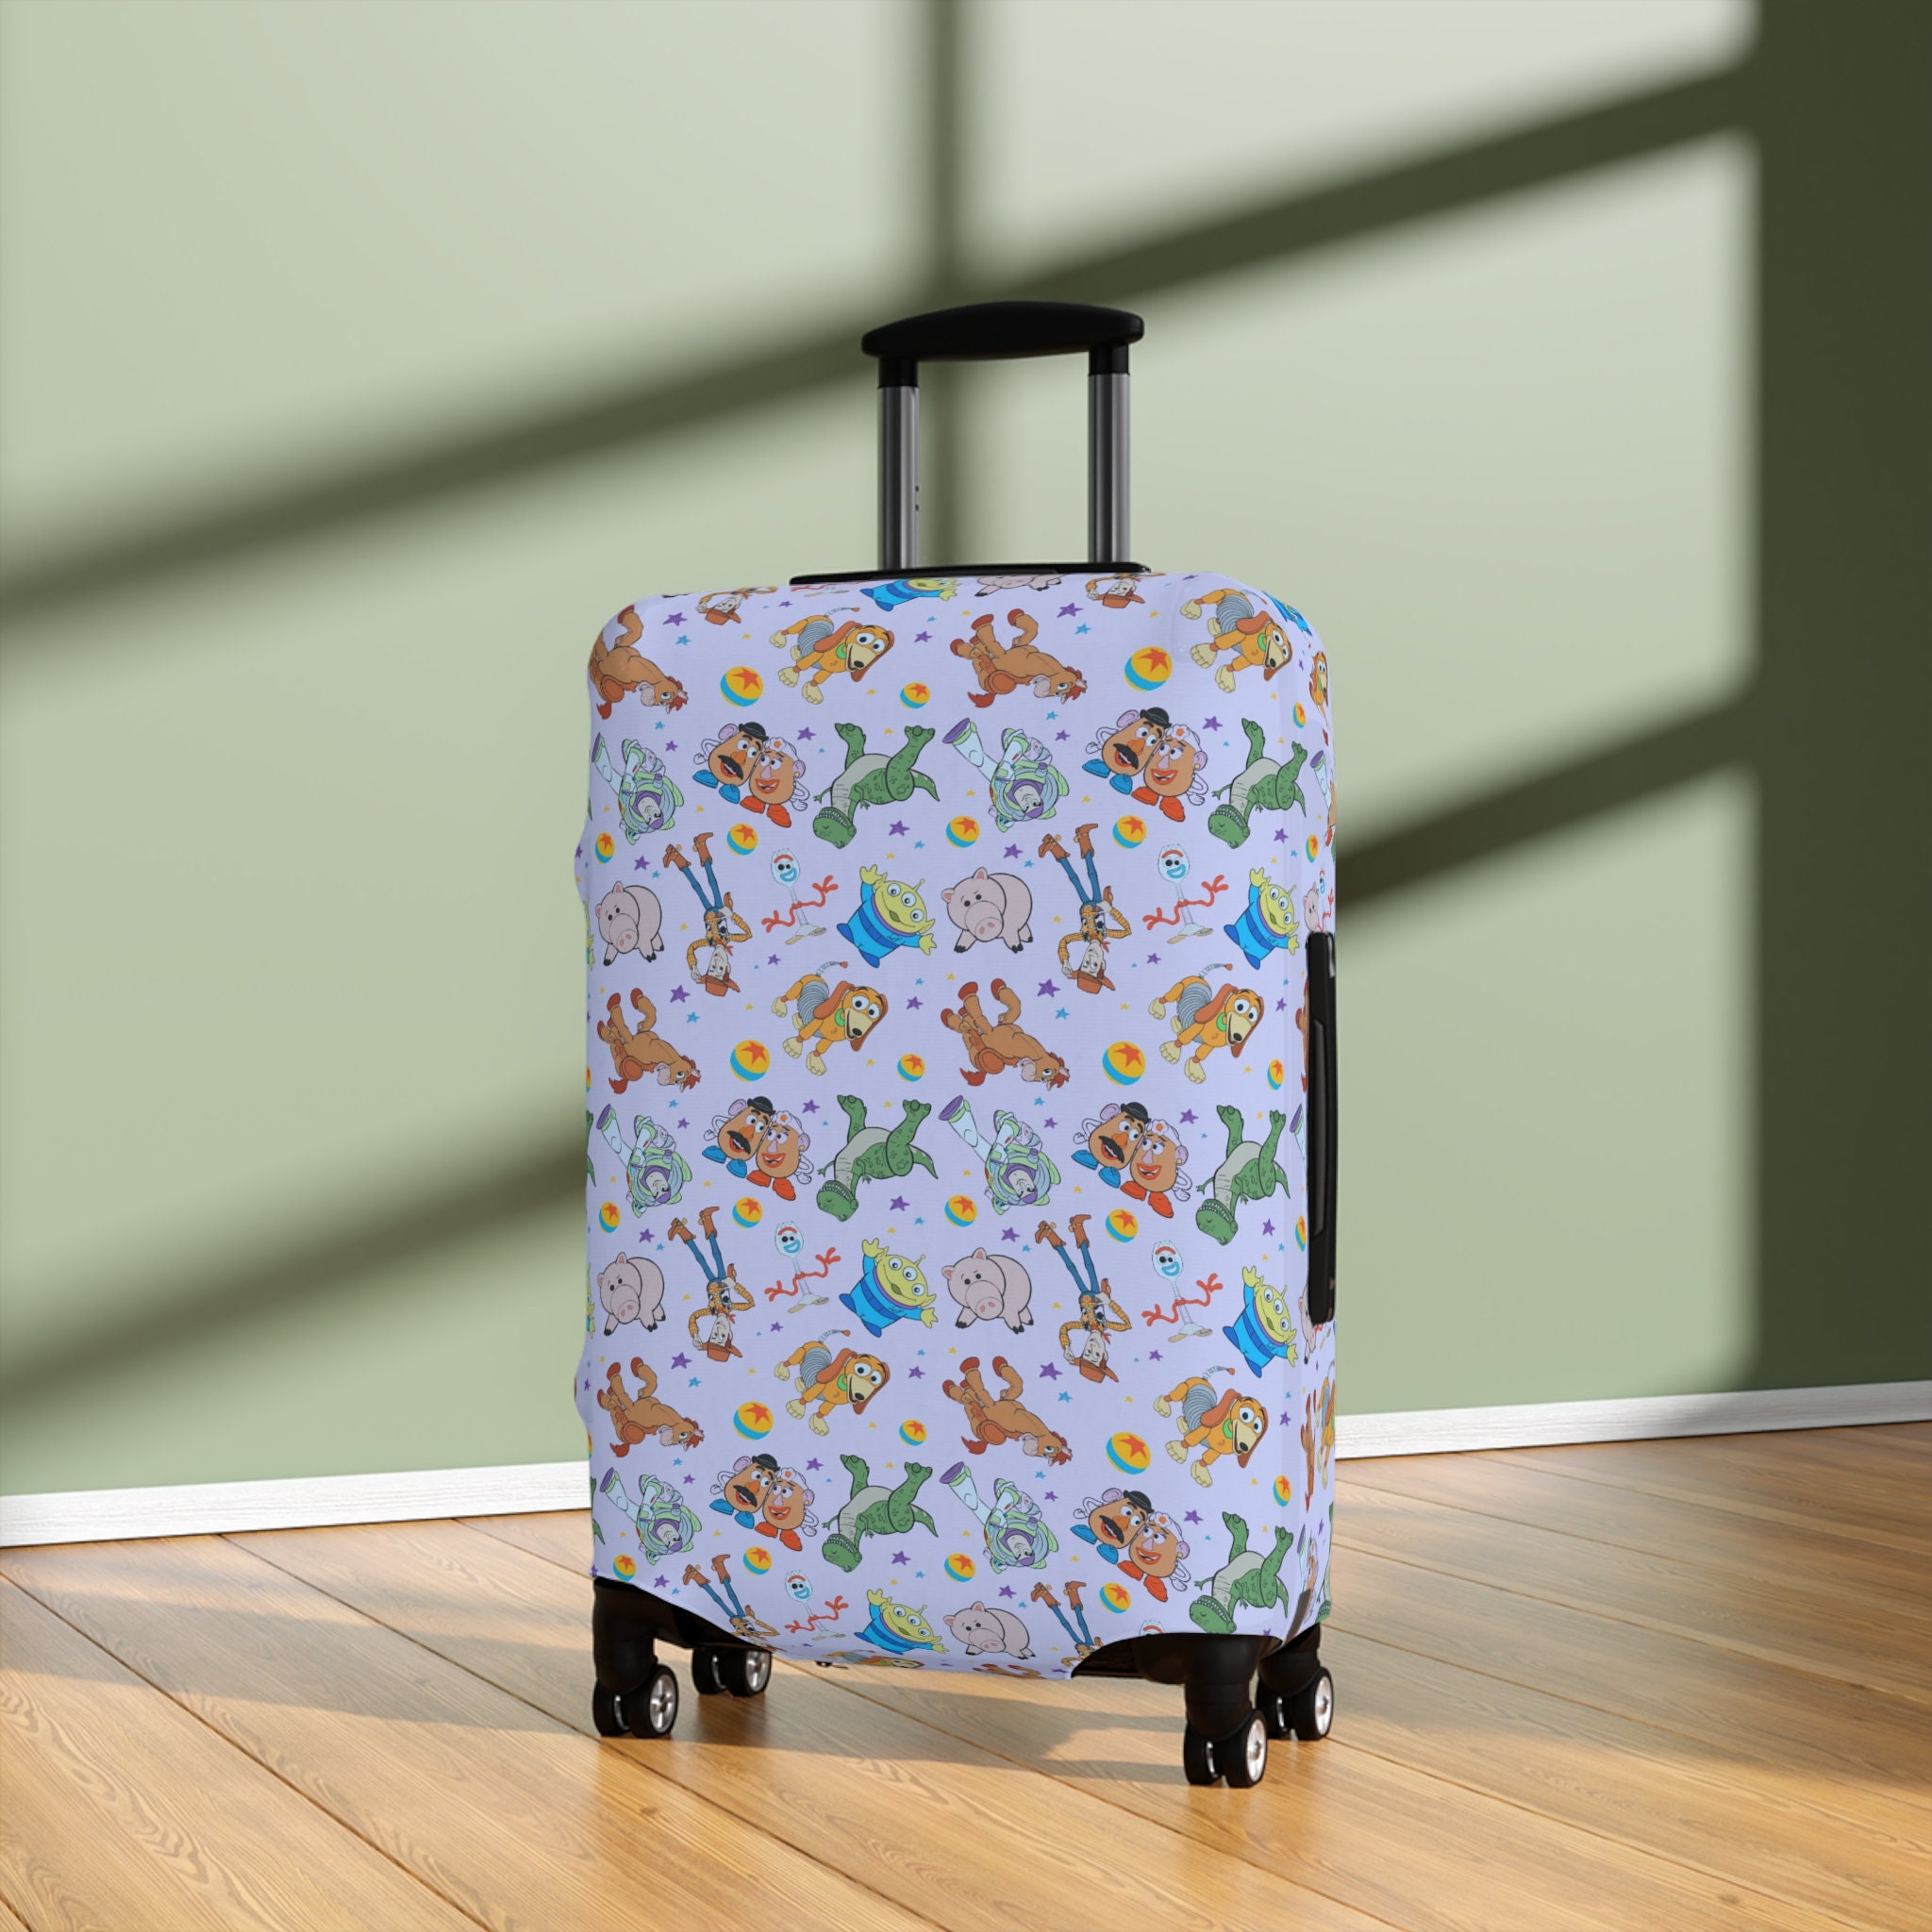 Kids Disney Luggage cover, Disney cover, Toy story Luggage cover